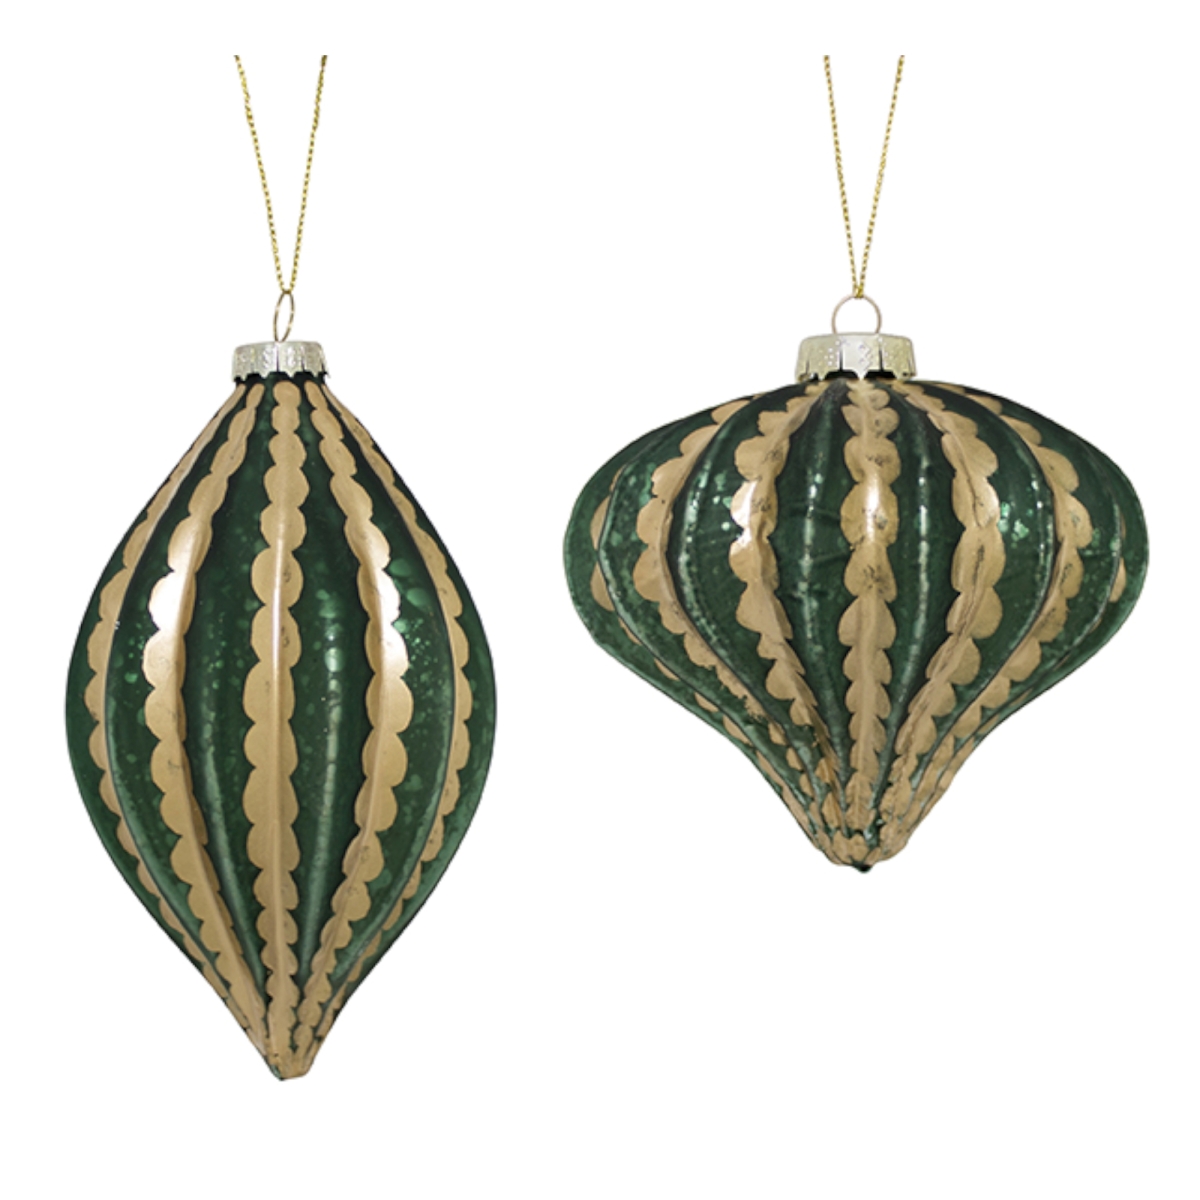 73089ds 5-6.75 In. Glass Ornament, Green & Gold - Set Of 6